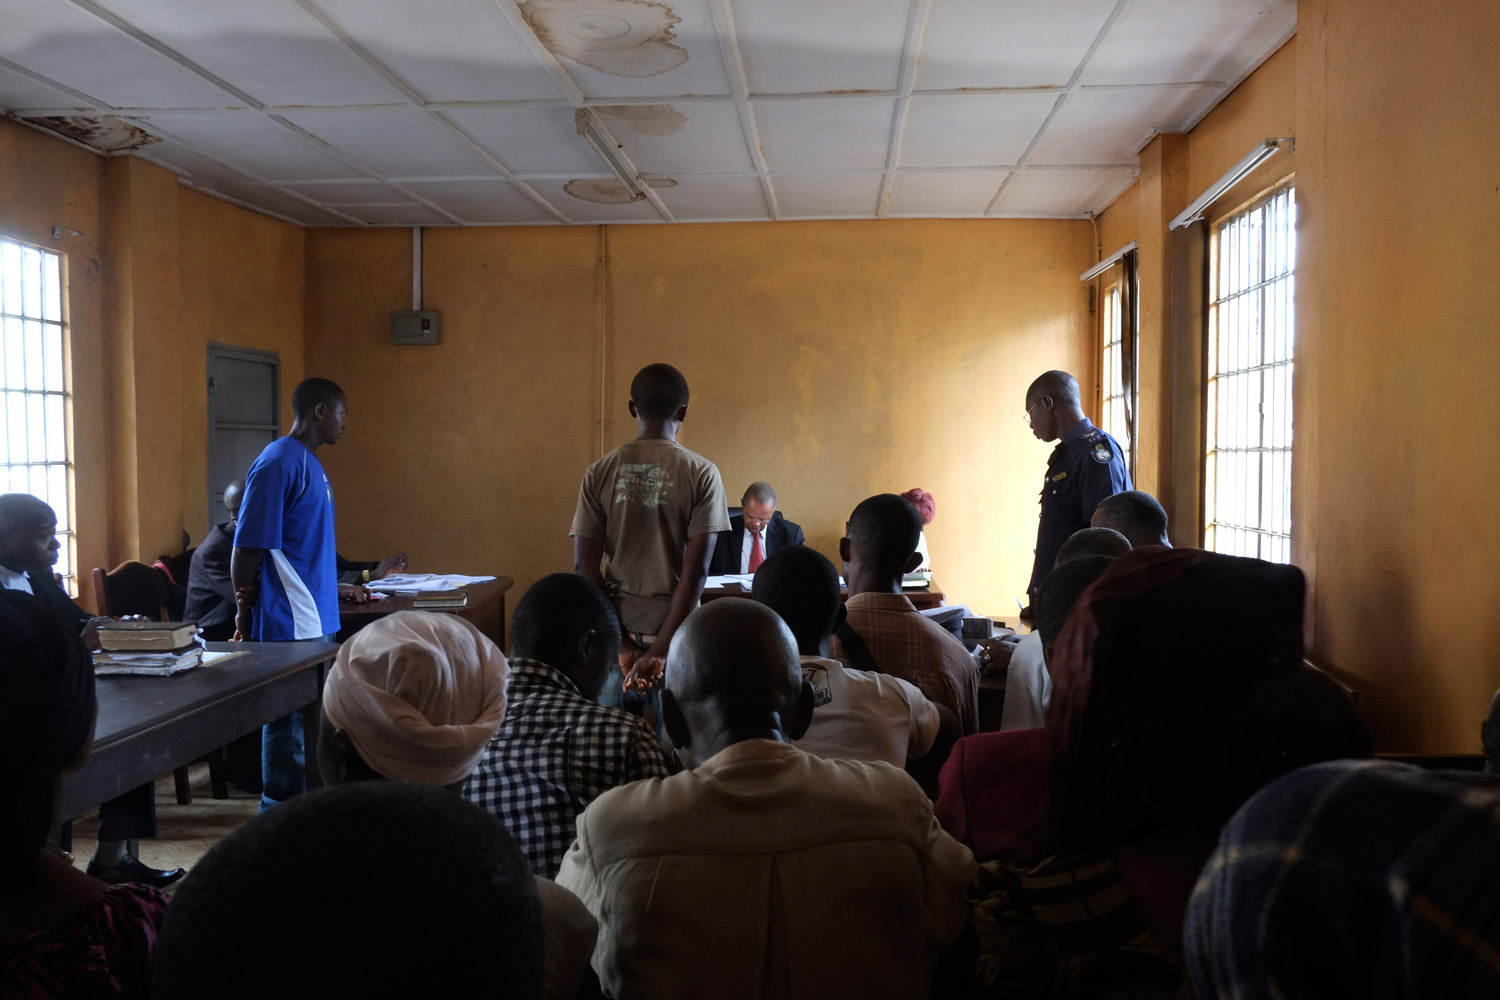 The rest of photographs in this gallery were made in October 2012.
                              Two years after he was first photographed, and after serving his time and being released, Sesay was again accused of stealing — this time a mobile phone. Here, Sesay appears before the judge in the juvenile court in Freetown. Photographer Fernando Moleres reimbursed the owner of the phone, and as a result Sesay was released. Moleres then took Sesay to the Saint Michael rehabilitation center, where he now lives.